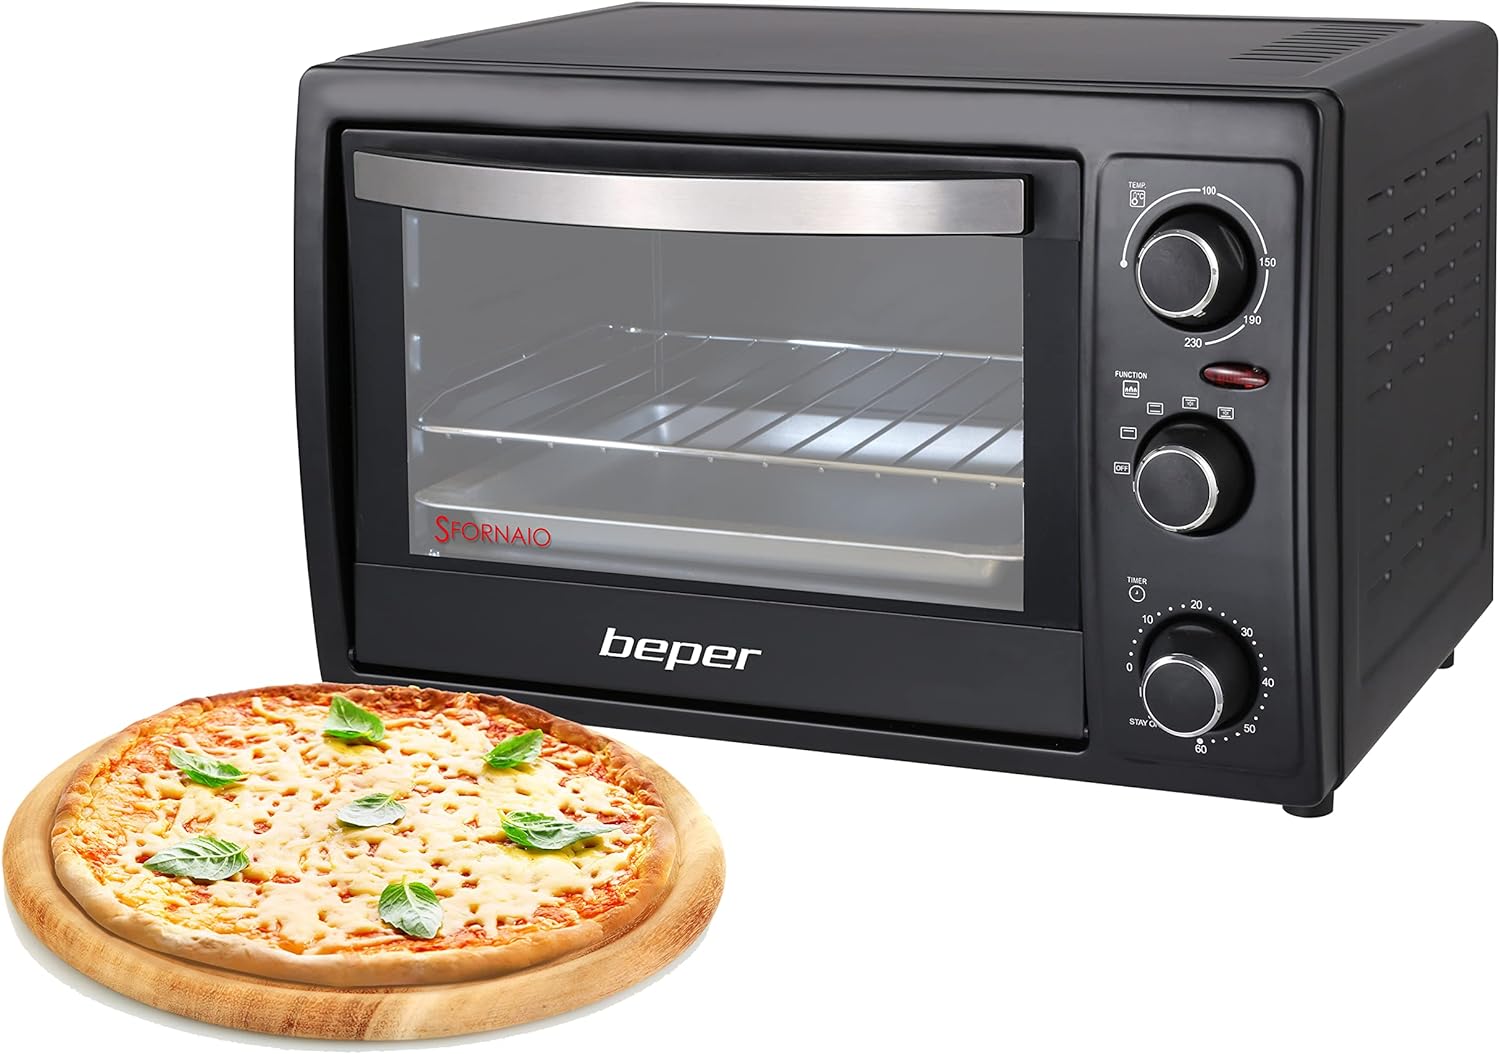 Beper Oven with Stainless Steel Heating Elements